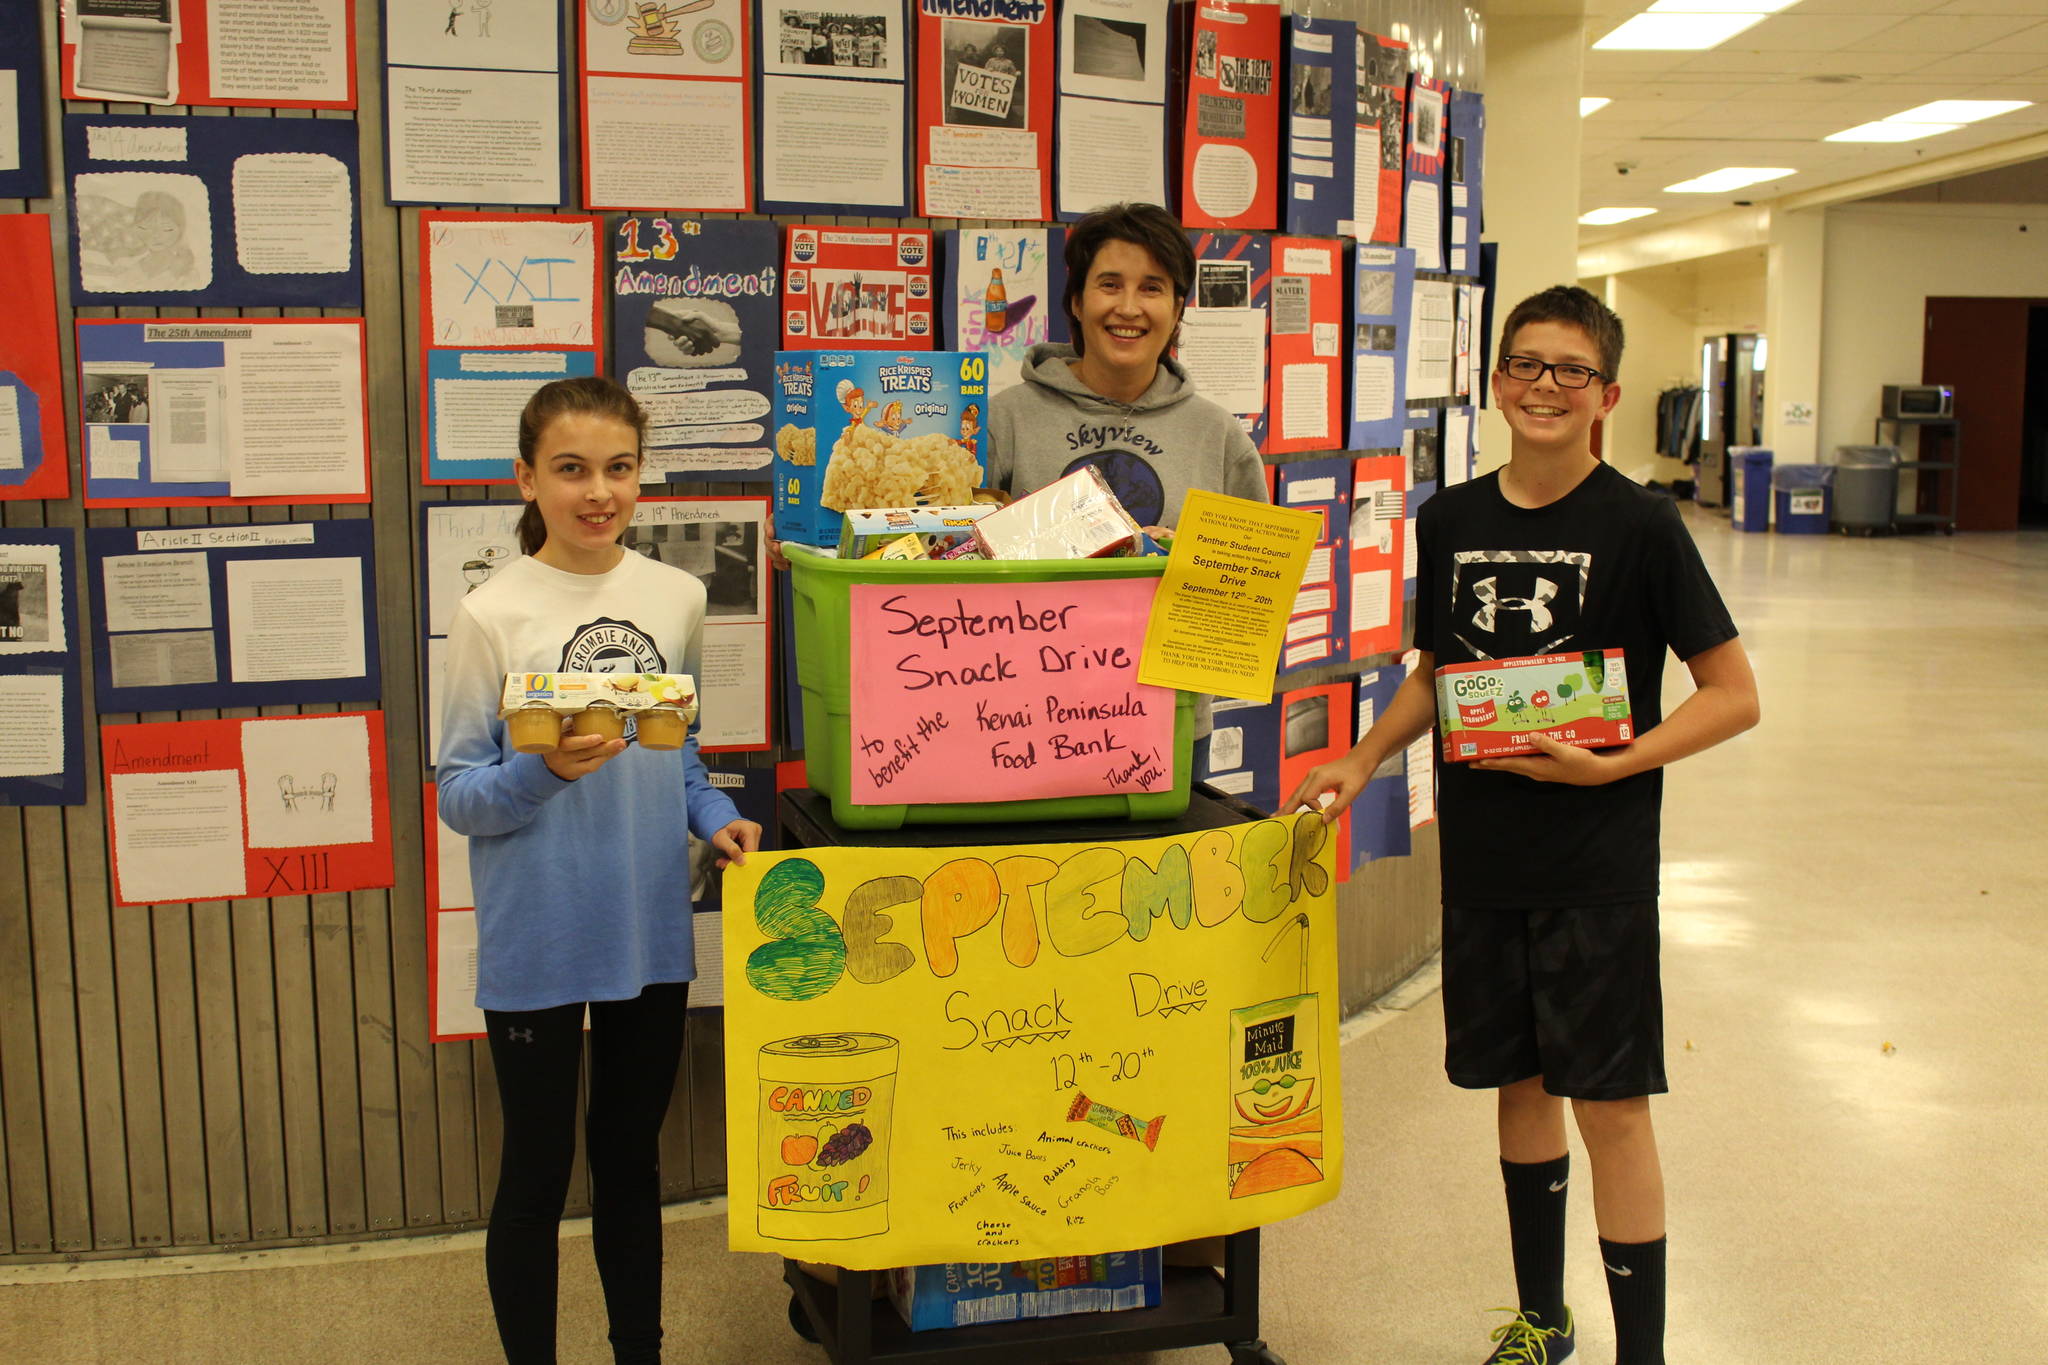 From left, eighth grader Avery Ciufo, student council adviser Sheilah Margaret Pothast and eighth grader Derrick Jones show off the food they’ve collected during their snack drive at Skyview Middle School in Soldotna, Alaska on Sept. 20, 2019. (Photo by Brian Mazurek/Peninsula Clarion)